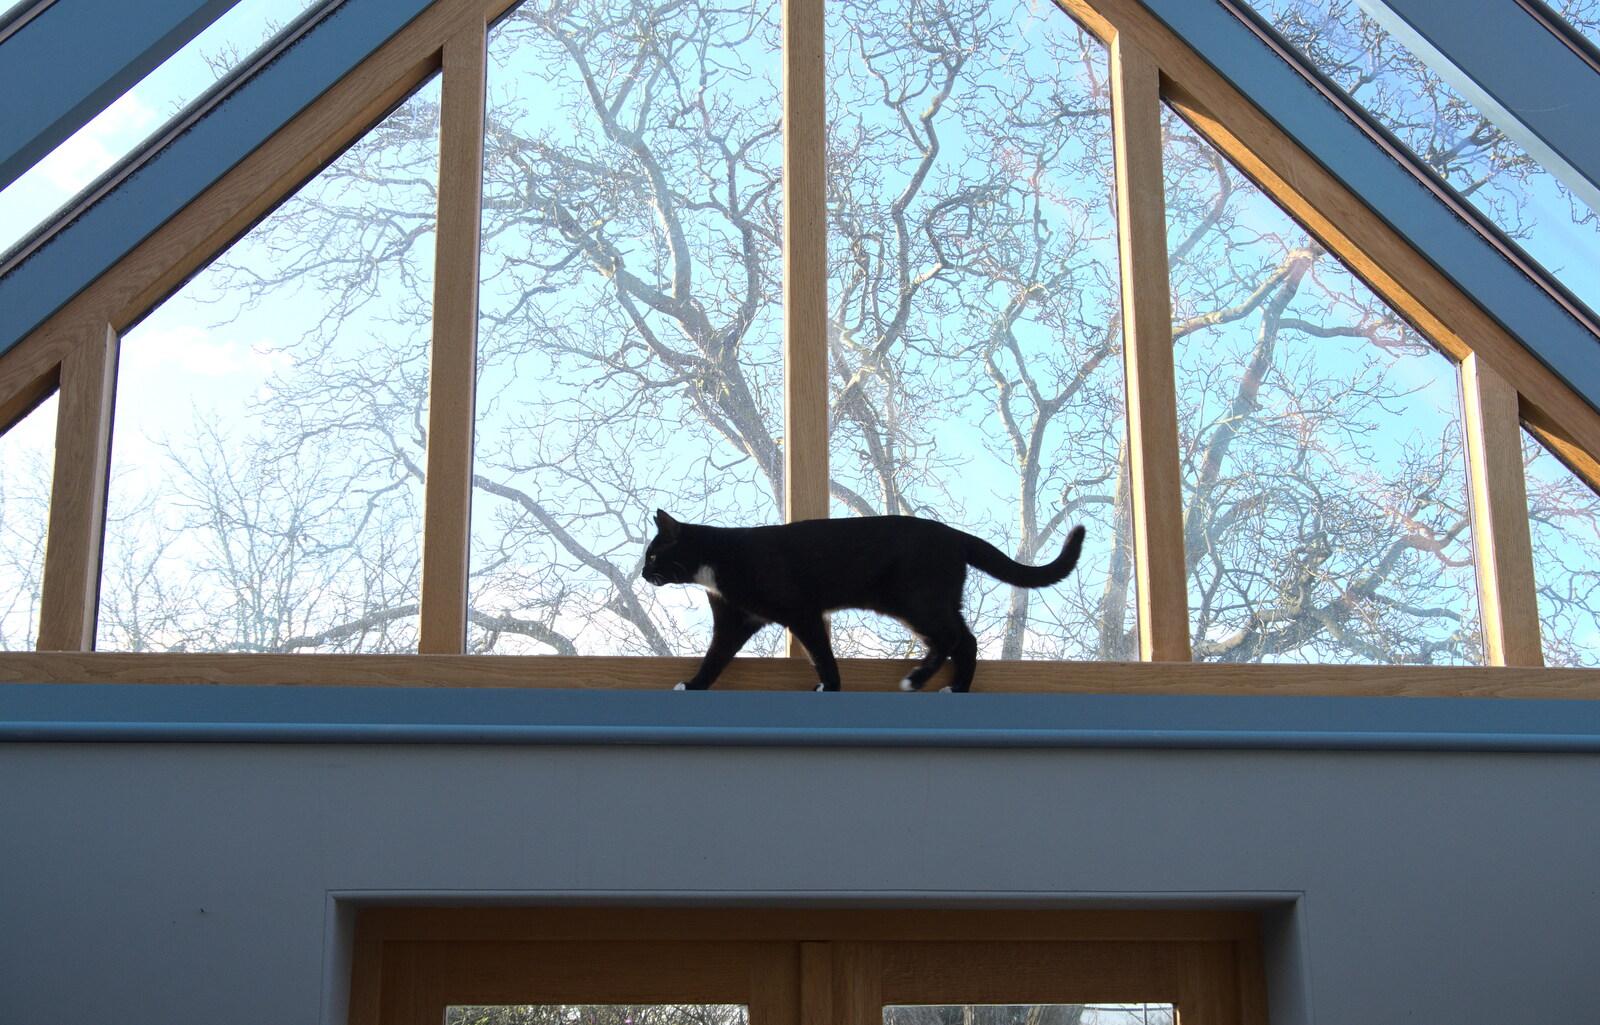 A Trip Down South, New Milton, Hampshire - 9th April 2022: Molly kitten climbs around